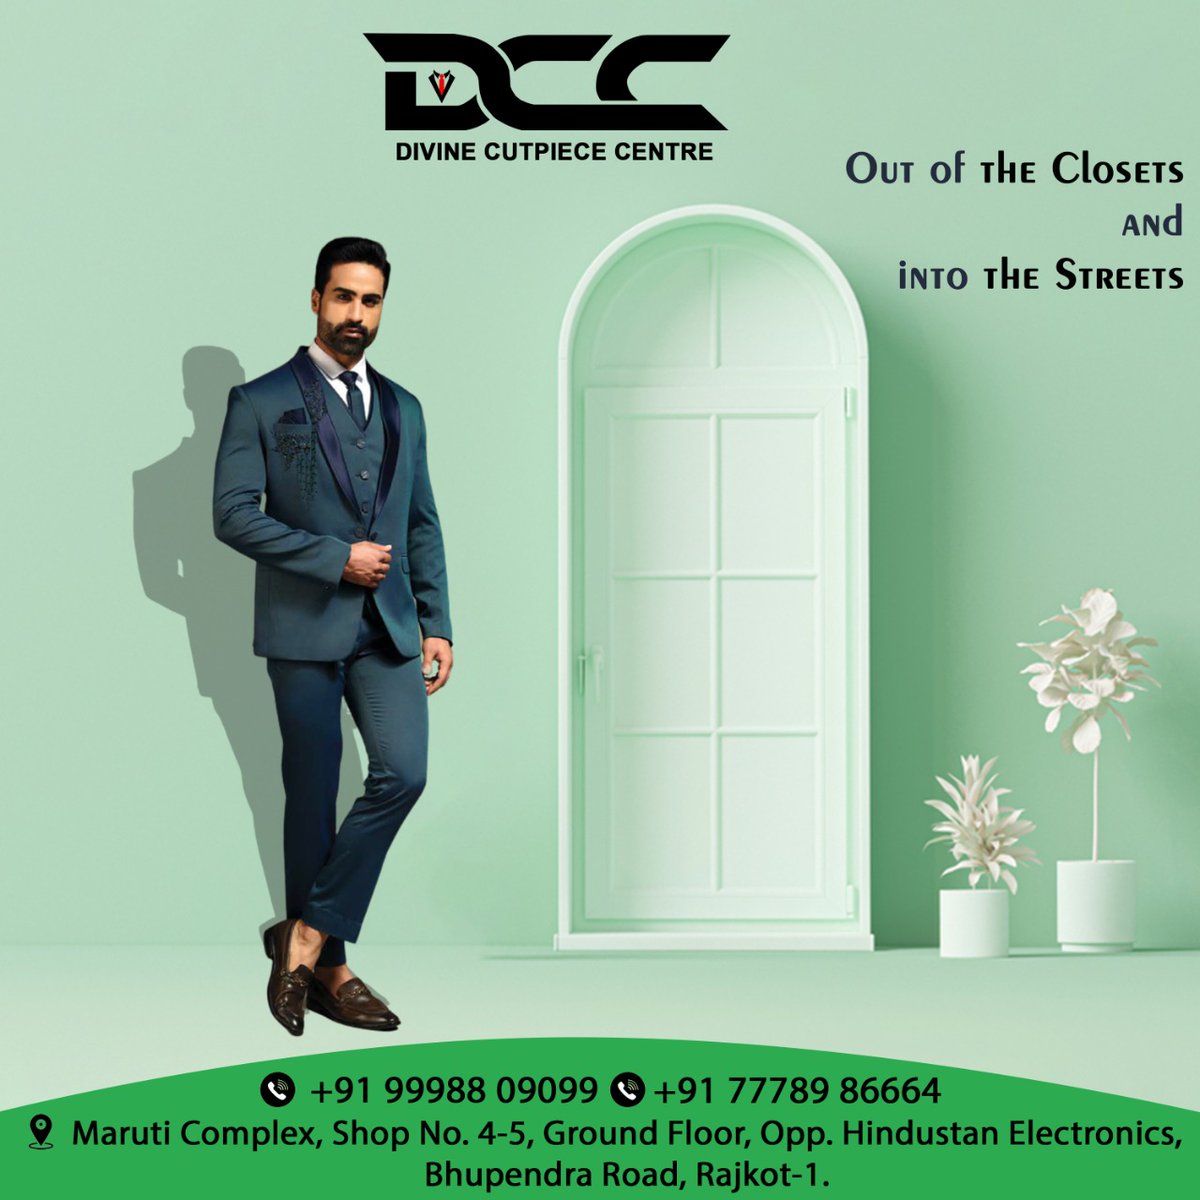 The unique designer suits will make you more unique everywhere.
Get in Touch with us : 99988 09099/7778986664

#divine #divineethnicwear #DCC #menswear #mensfashion #ethnicwear #ethnicwearformen #traditional #weddingclothes #rajkot_diaries #rajkotcity #rajkot #gujarat